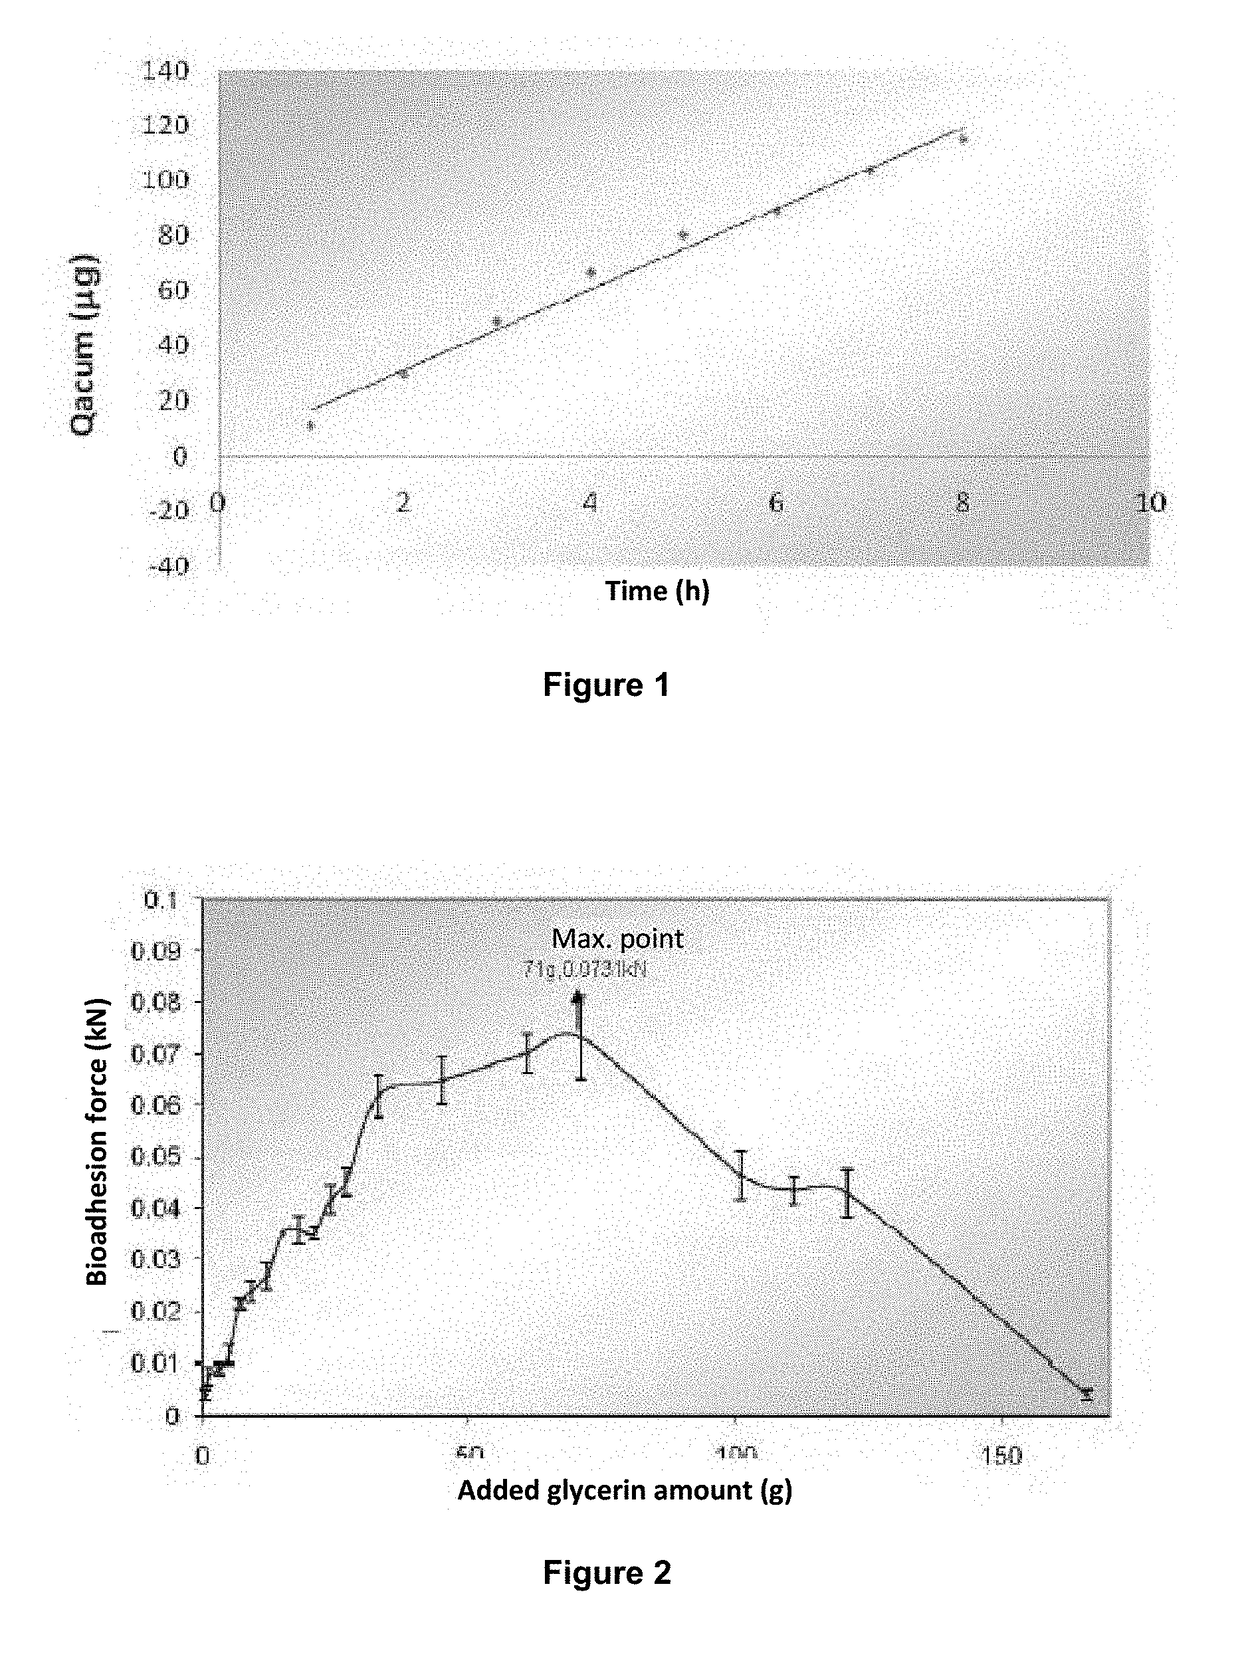 Pharmaceutical composition in ivermectin emulgel for veterinary use as a promoter system and bio-adhesive in antiparasitic treatment, and method for the production thereof